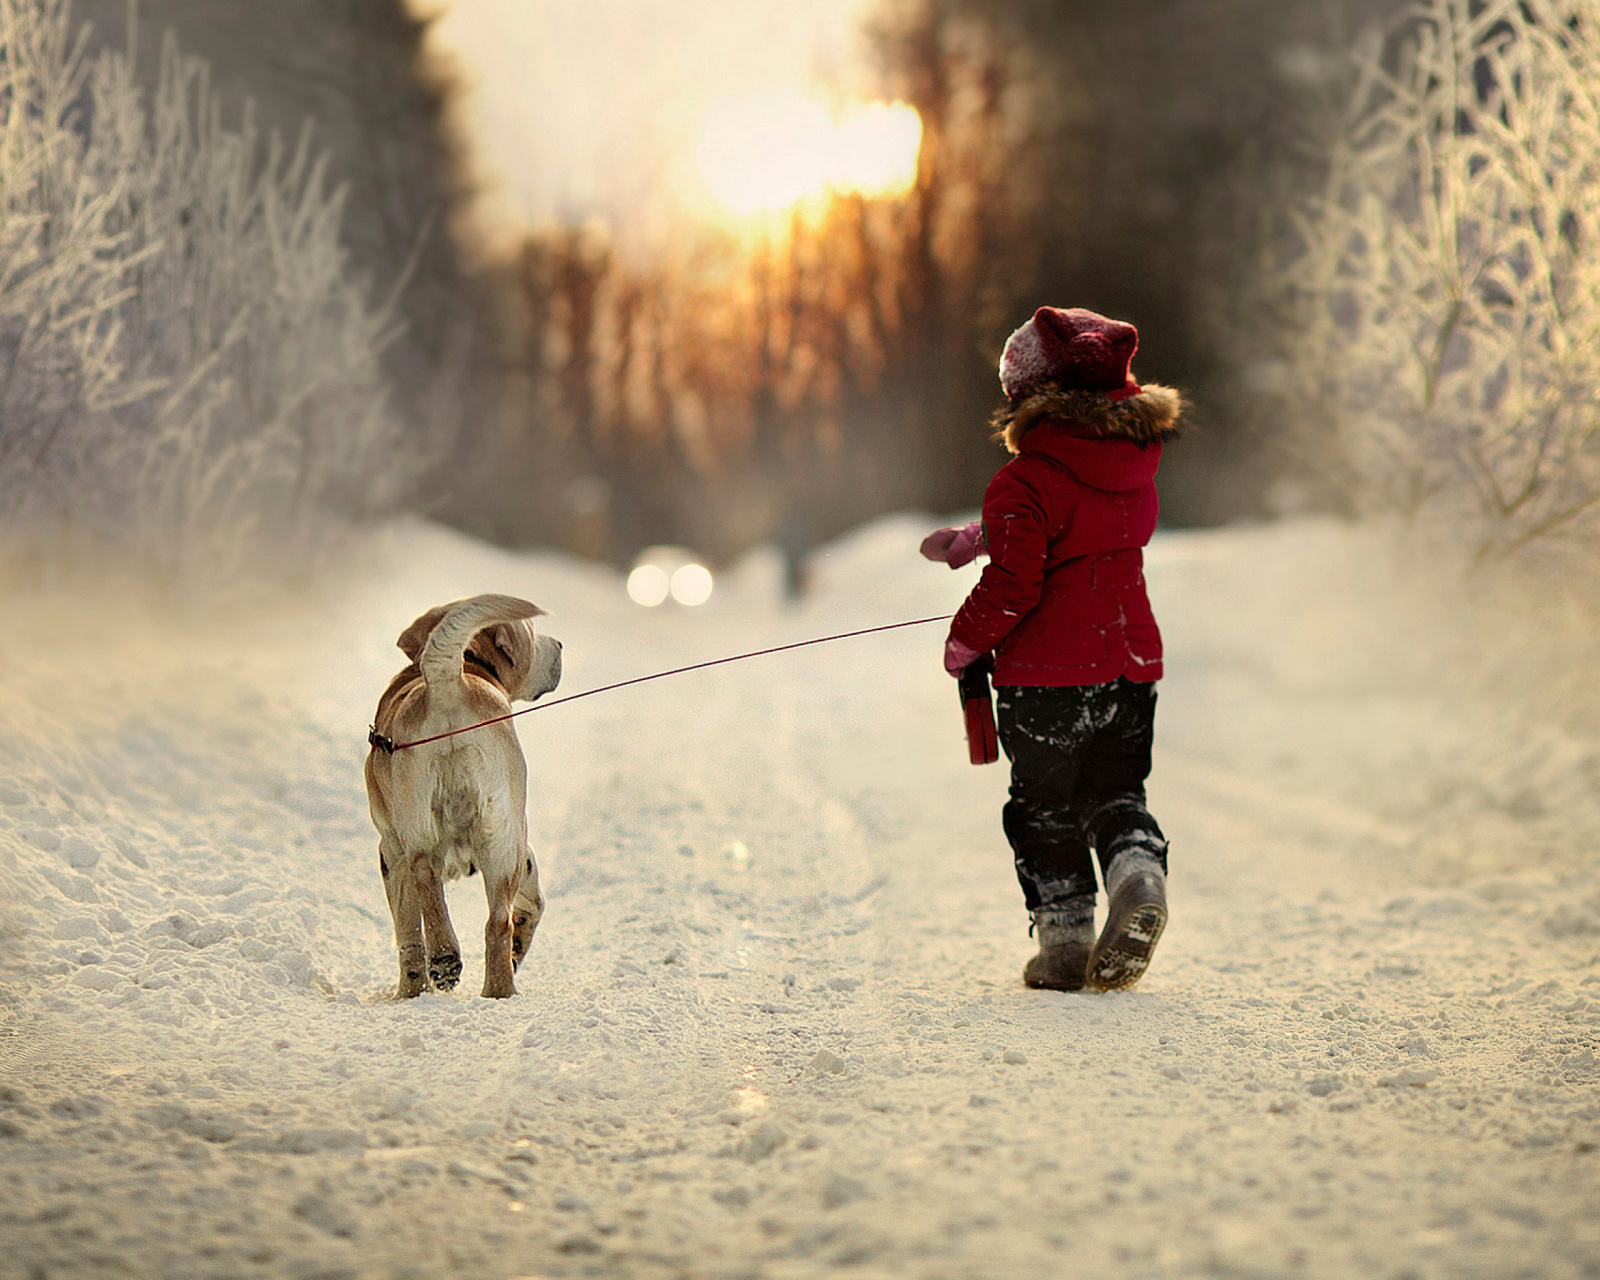 Winter Walking with Dog wallpaper 1600x1280